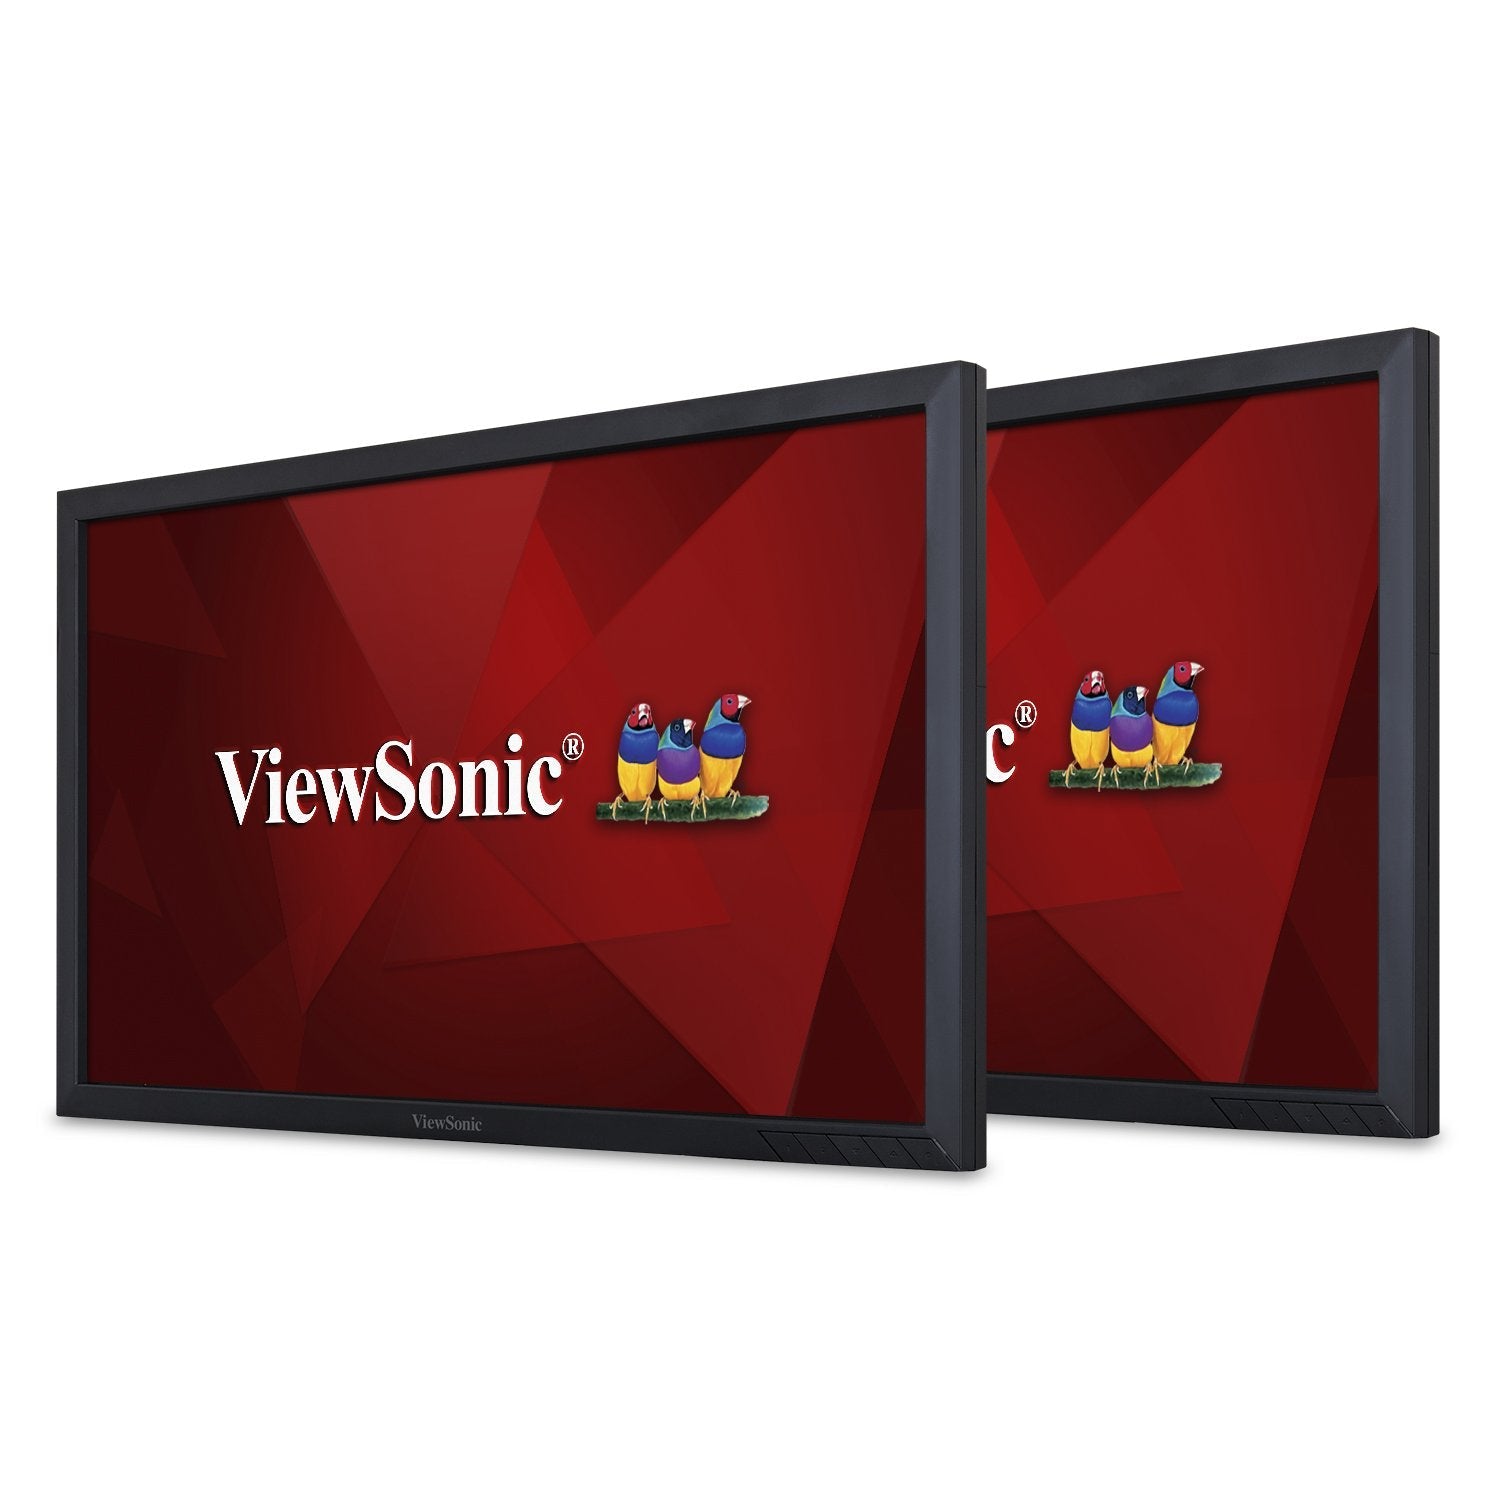 ViewSonic VG2249_H2-R 22" SuperClear LCD Monitor 2-Pack Without Stands - C Grade Refurbished